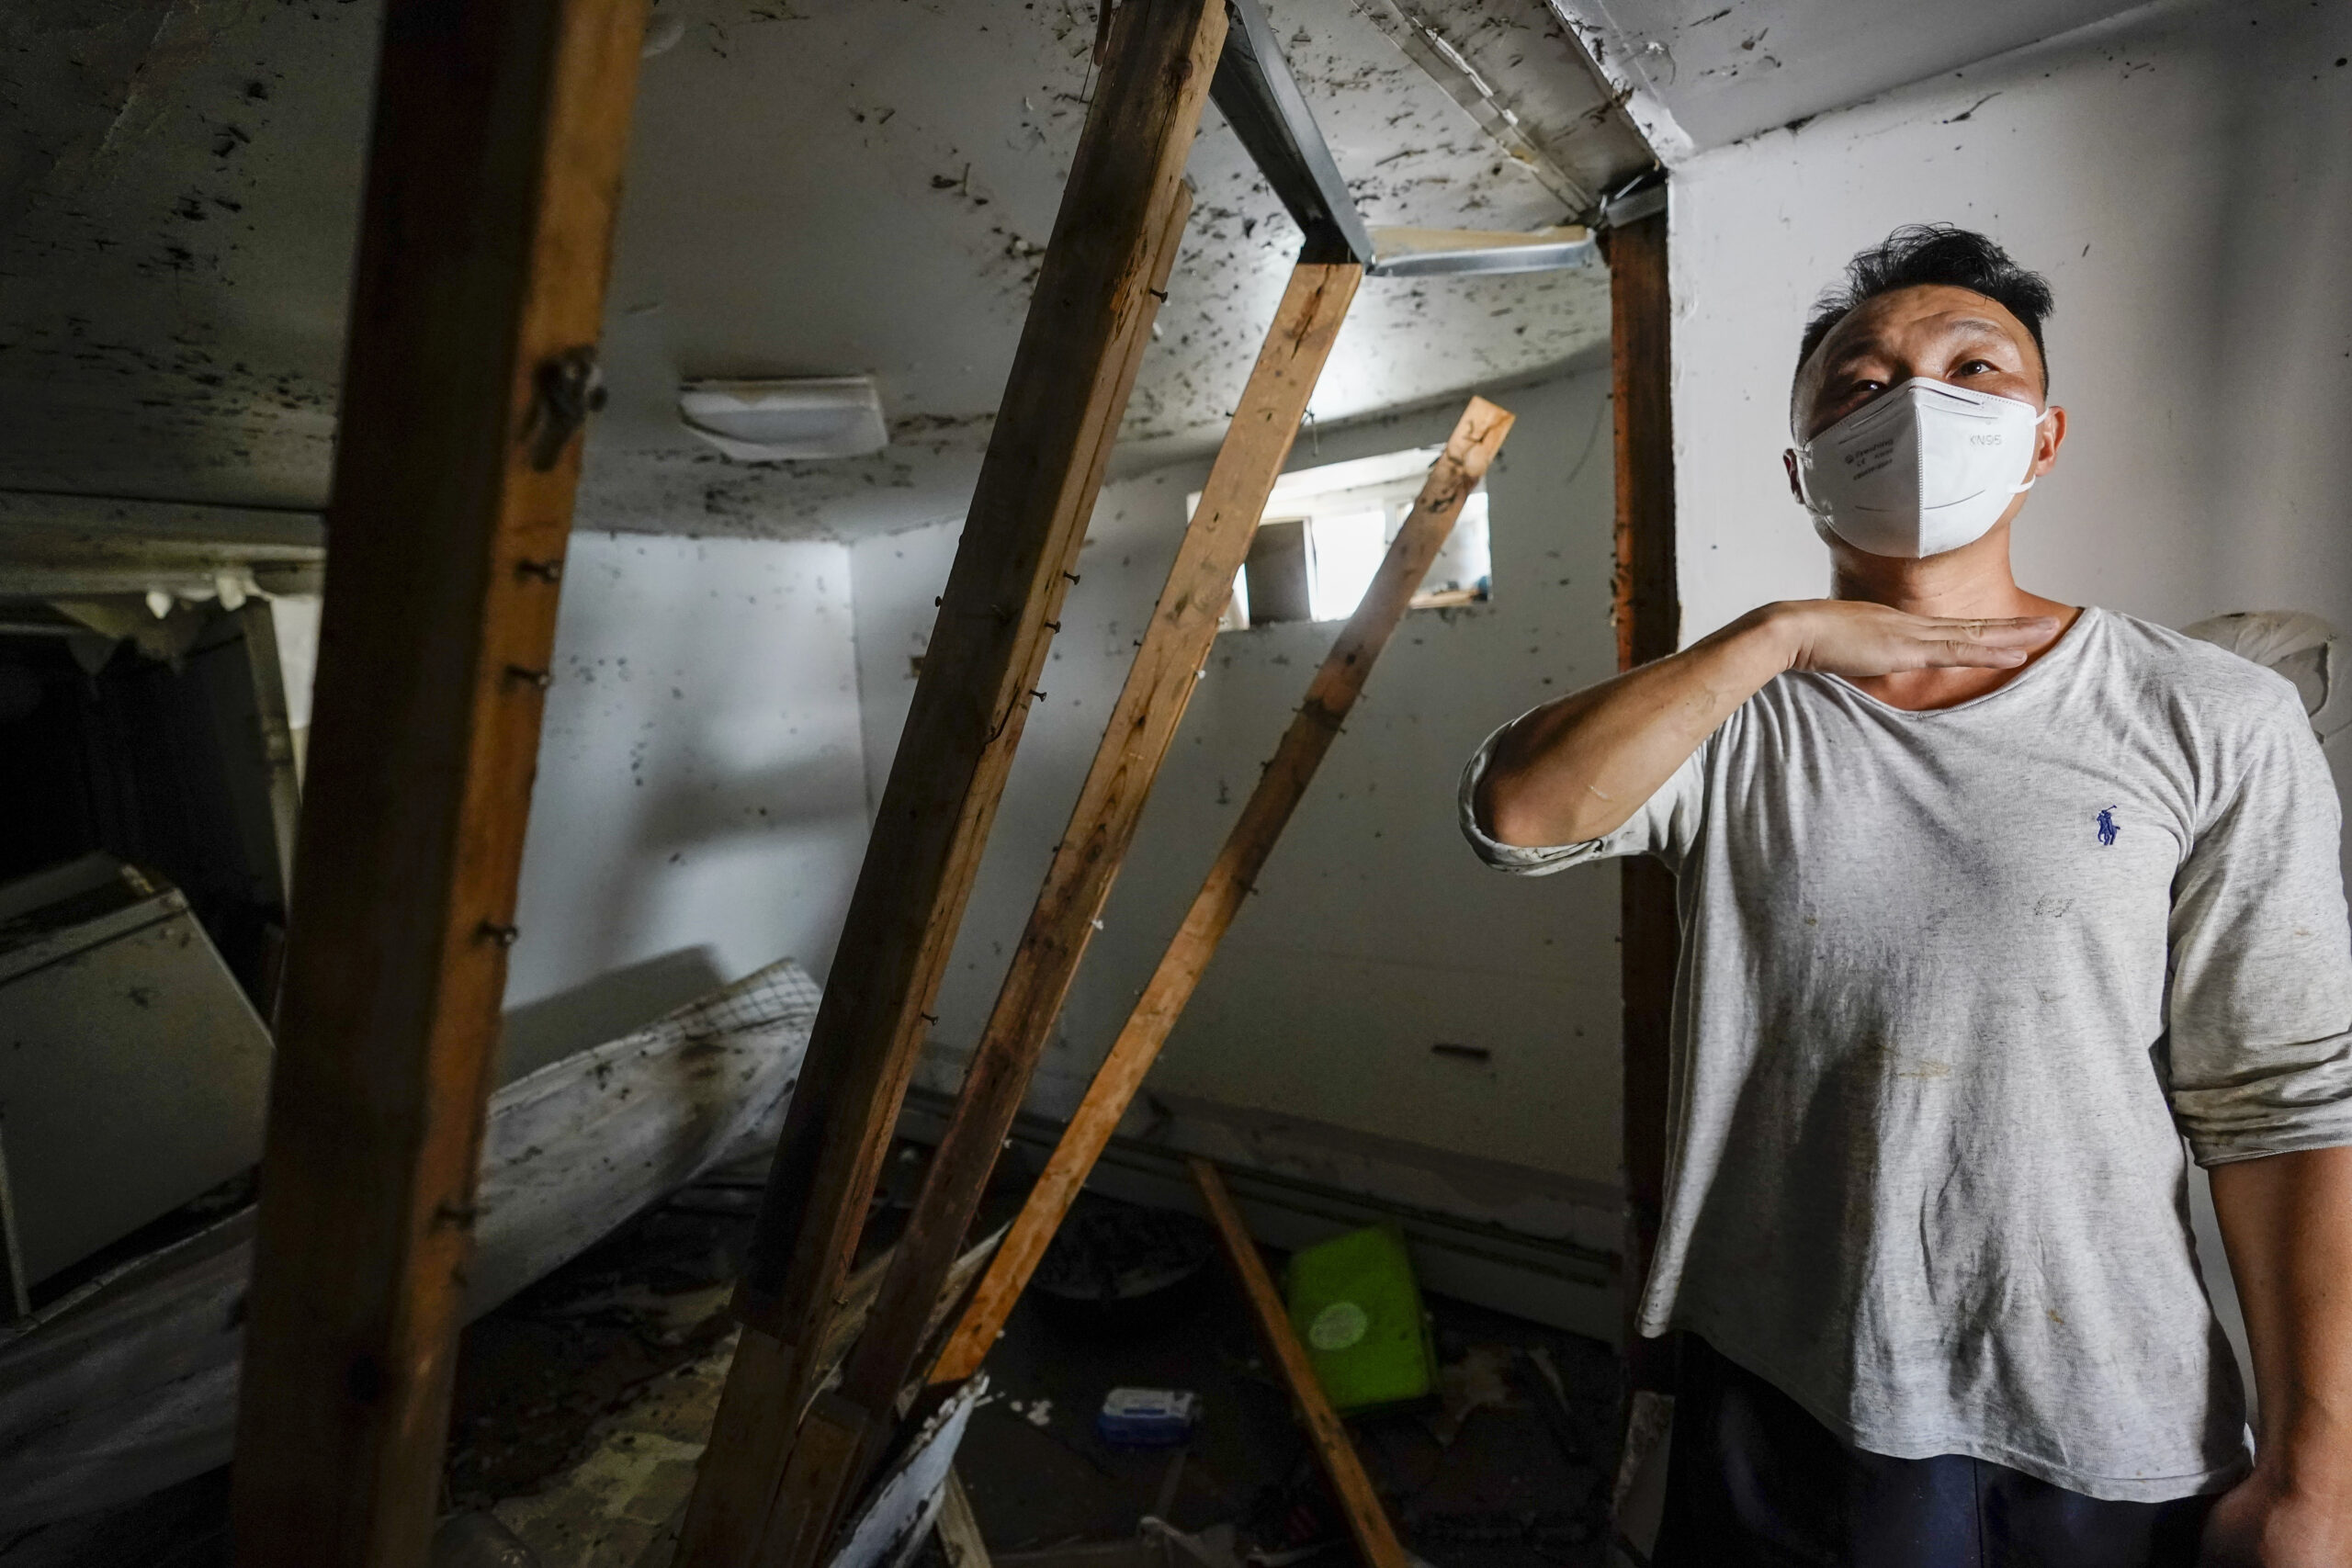 Danny Hong shows where the water reached up to him as he shows the damage in his basement apartment on 153rd St. in the Flushing neighborhood of the Queens borough of New York, Thursday, Sept. 2, 2021, in New York. The remnants of Hurricane Ida dumped historic rain over New York City, with at least nine deaths linked to flooding in the region as basement apartments suddenly filled with water and freeways and boulevards turned into rivers, submerging cars.(AP Photo/Mary Altaffer)